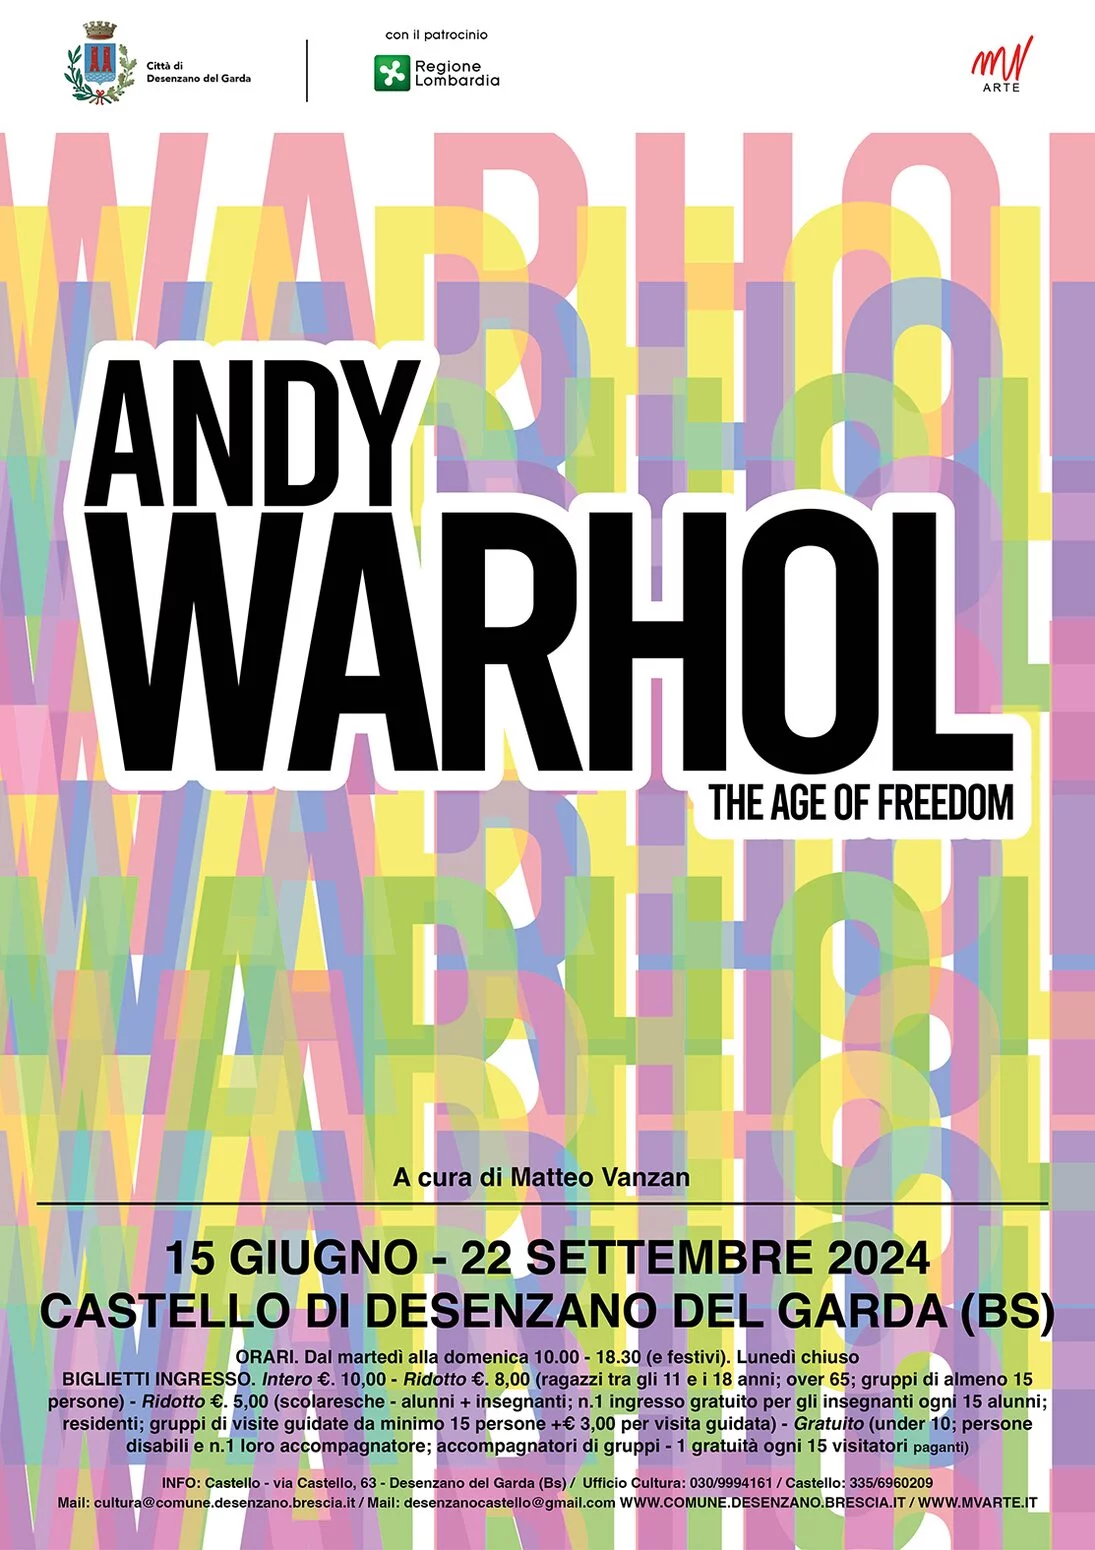 Andy Warhol. The Age of Freedom